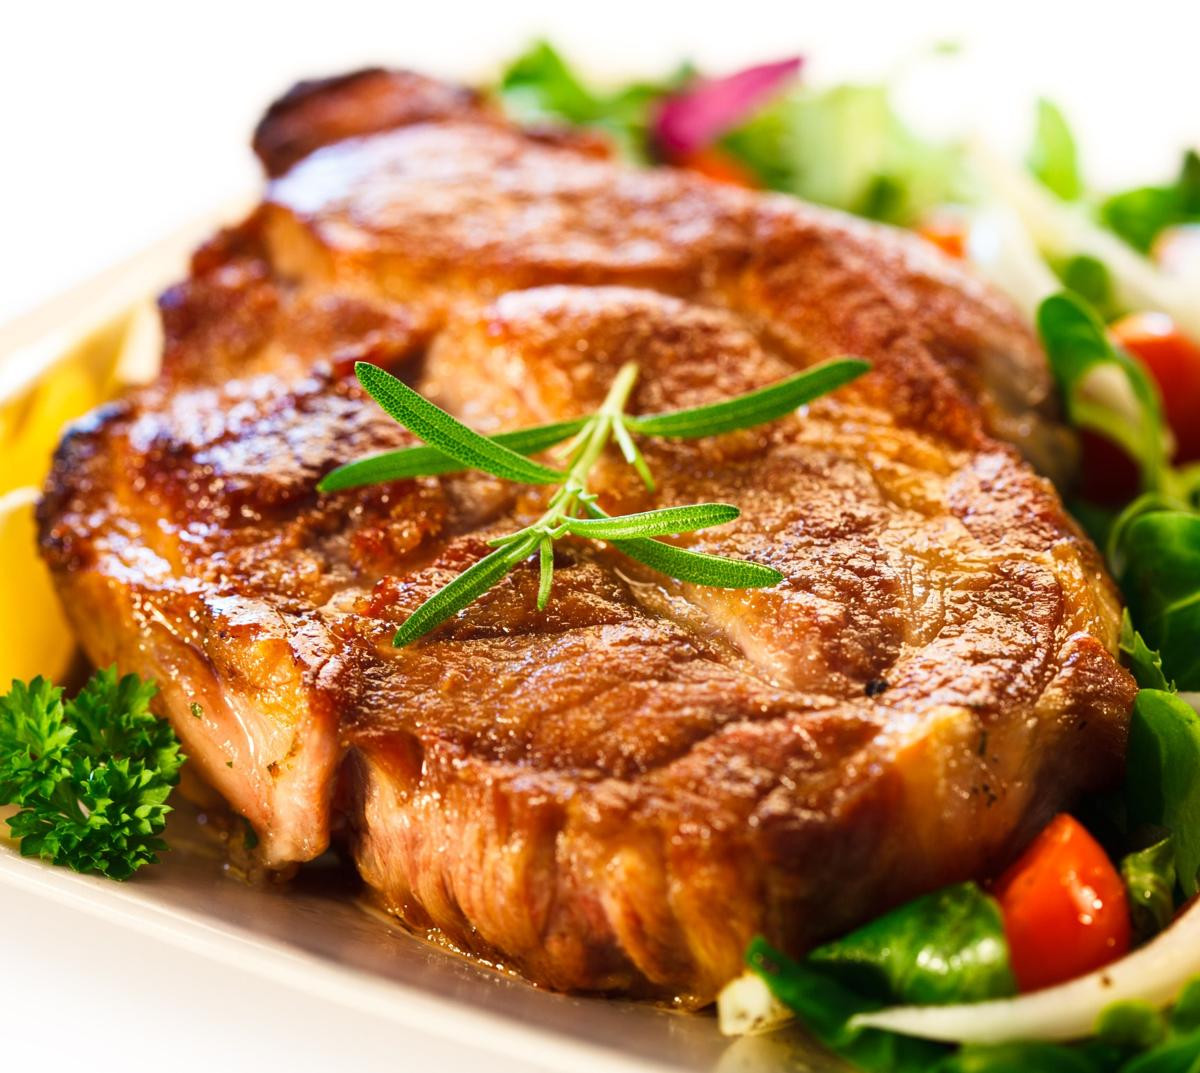 Grilled Pork Chops On Stove
 Making Butterfly Pork Chops in the Oven is Now Easier Than